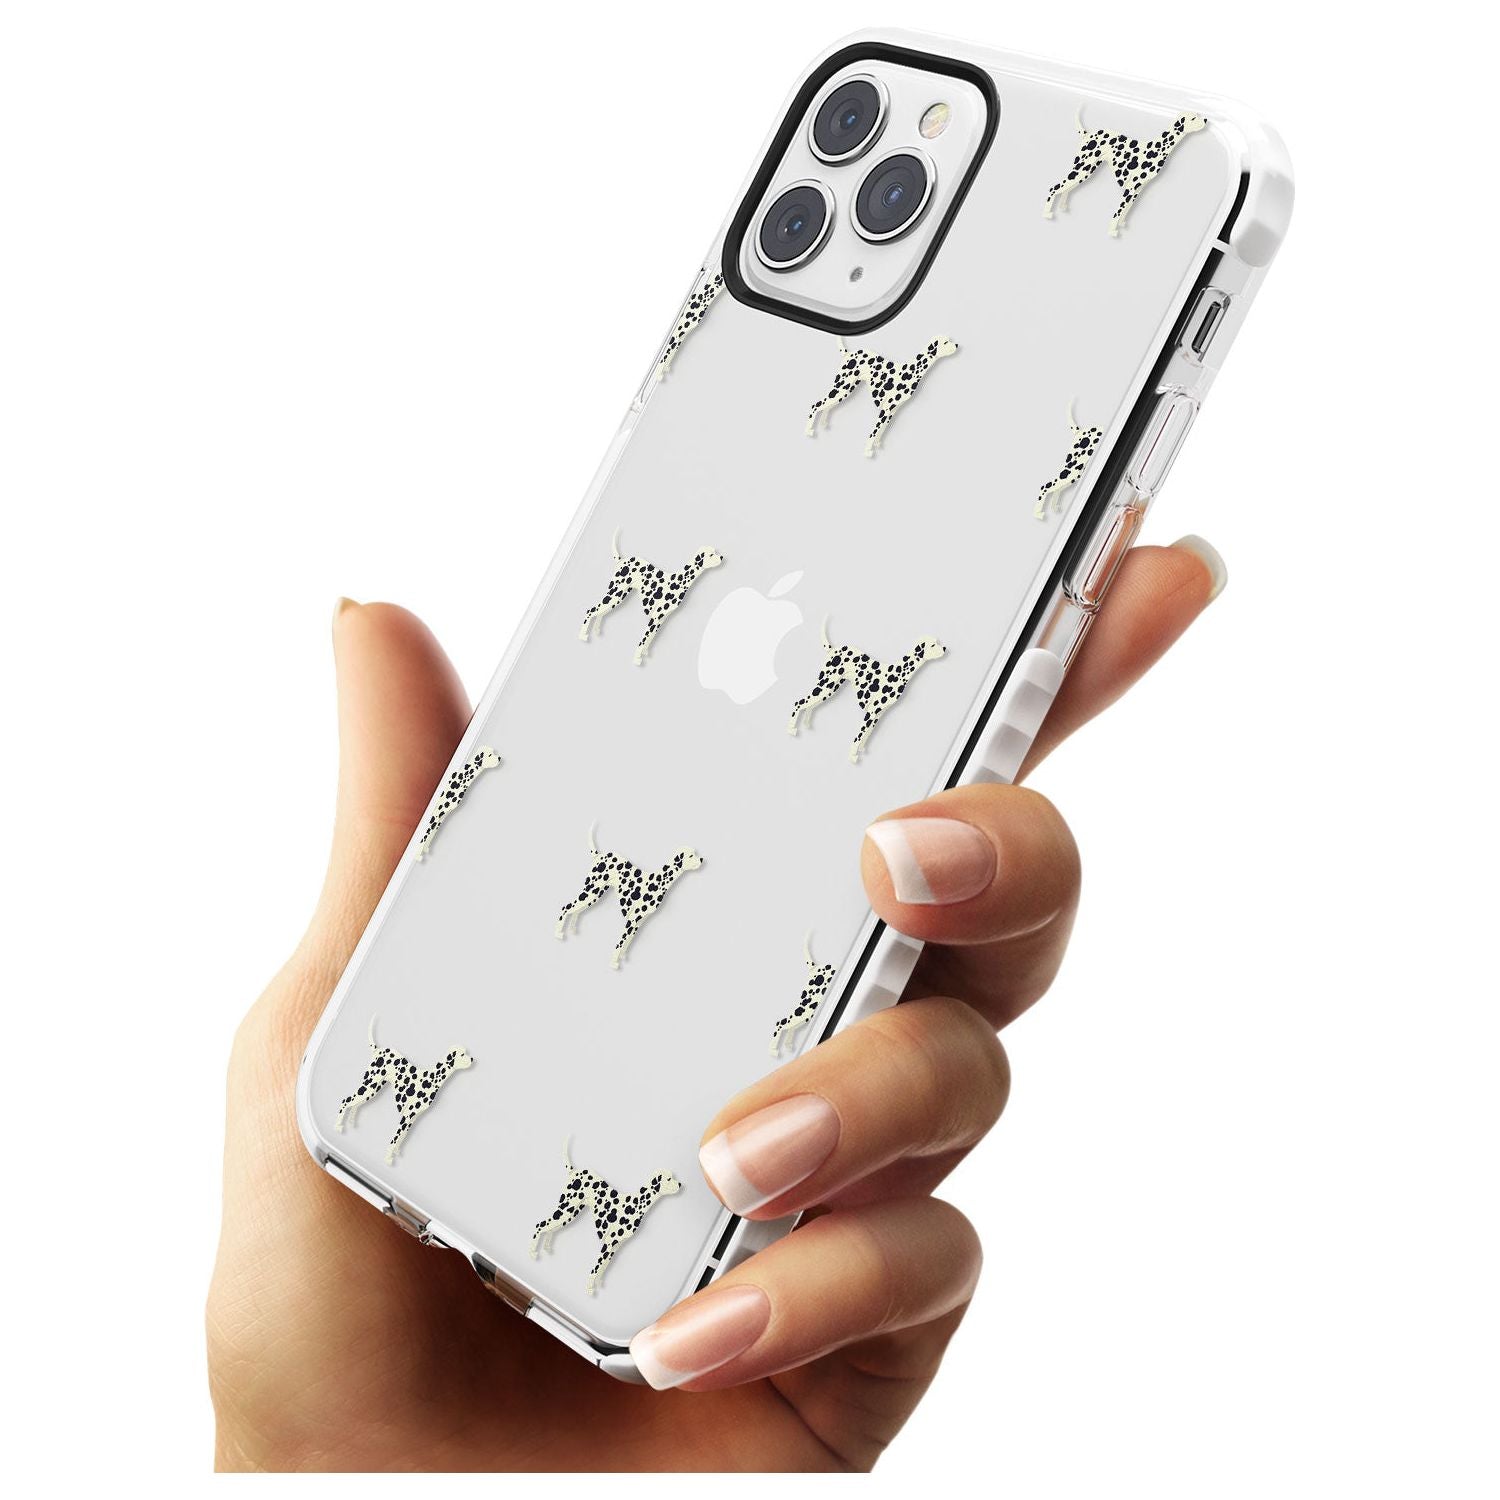 Dalmation Dog Pattern Clear Impact Phone Case for iPhone 11 Pro Max